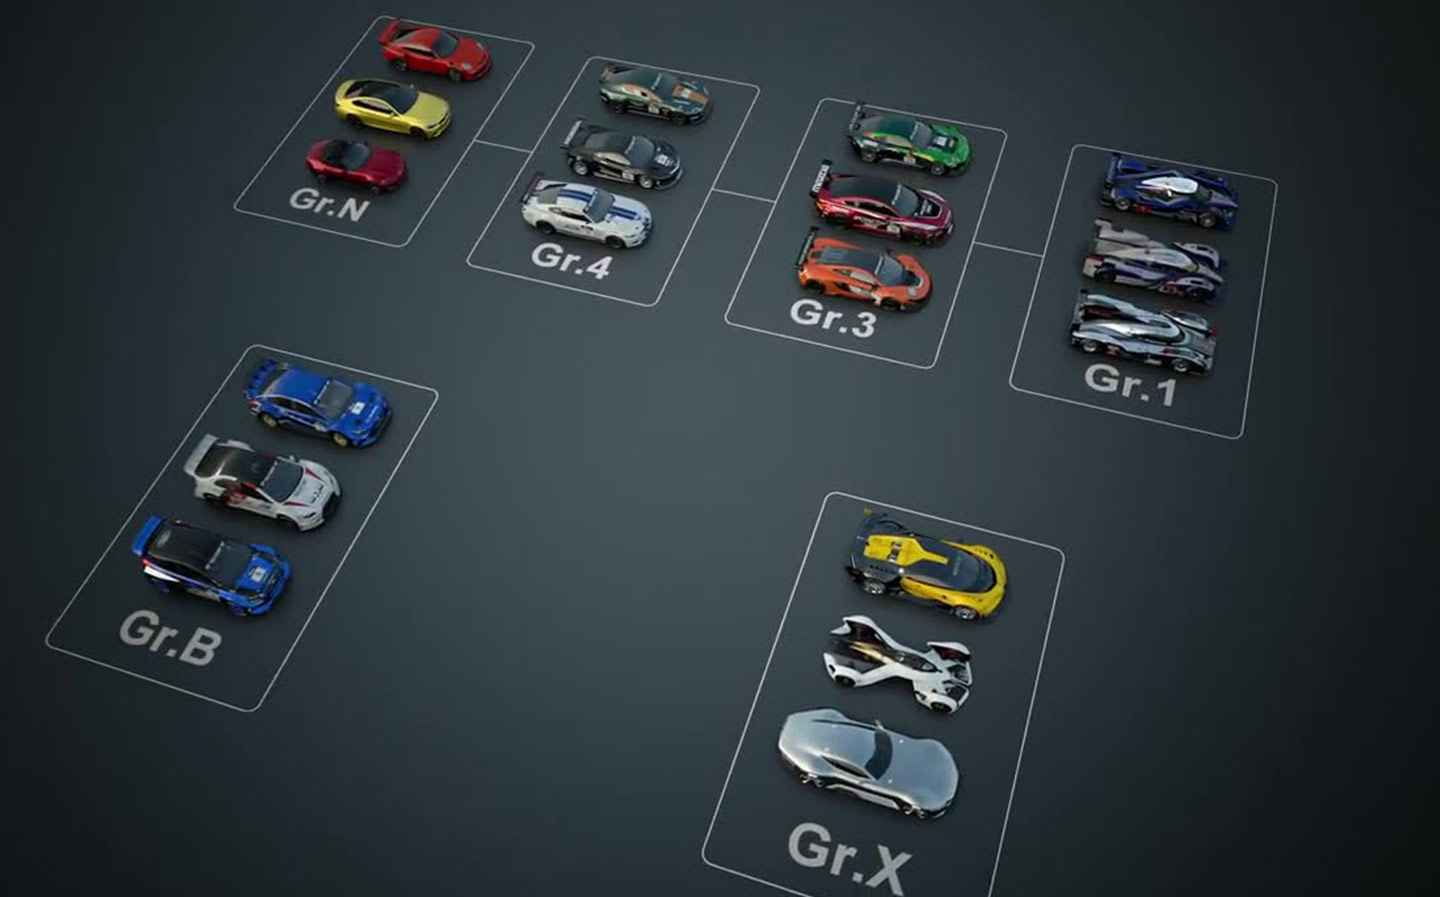 Discover Ford models in Gran Turismo: From classic to modern